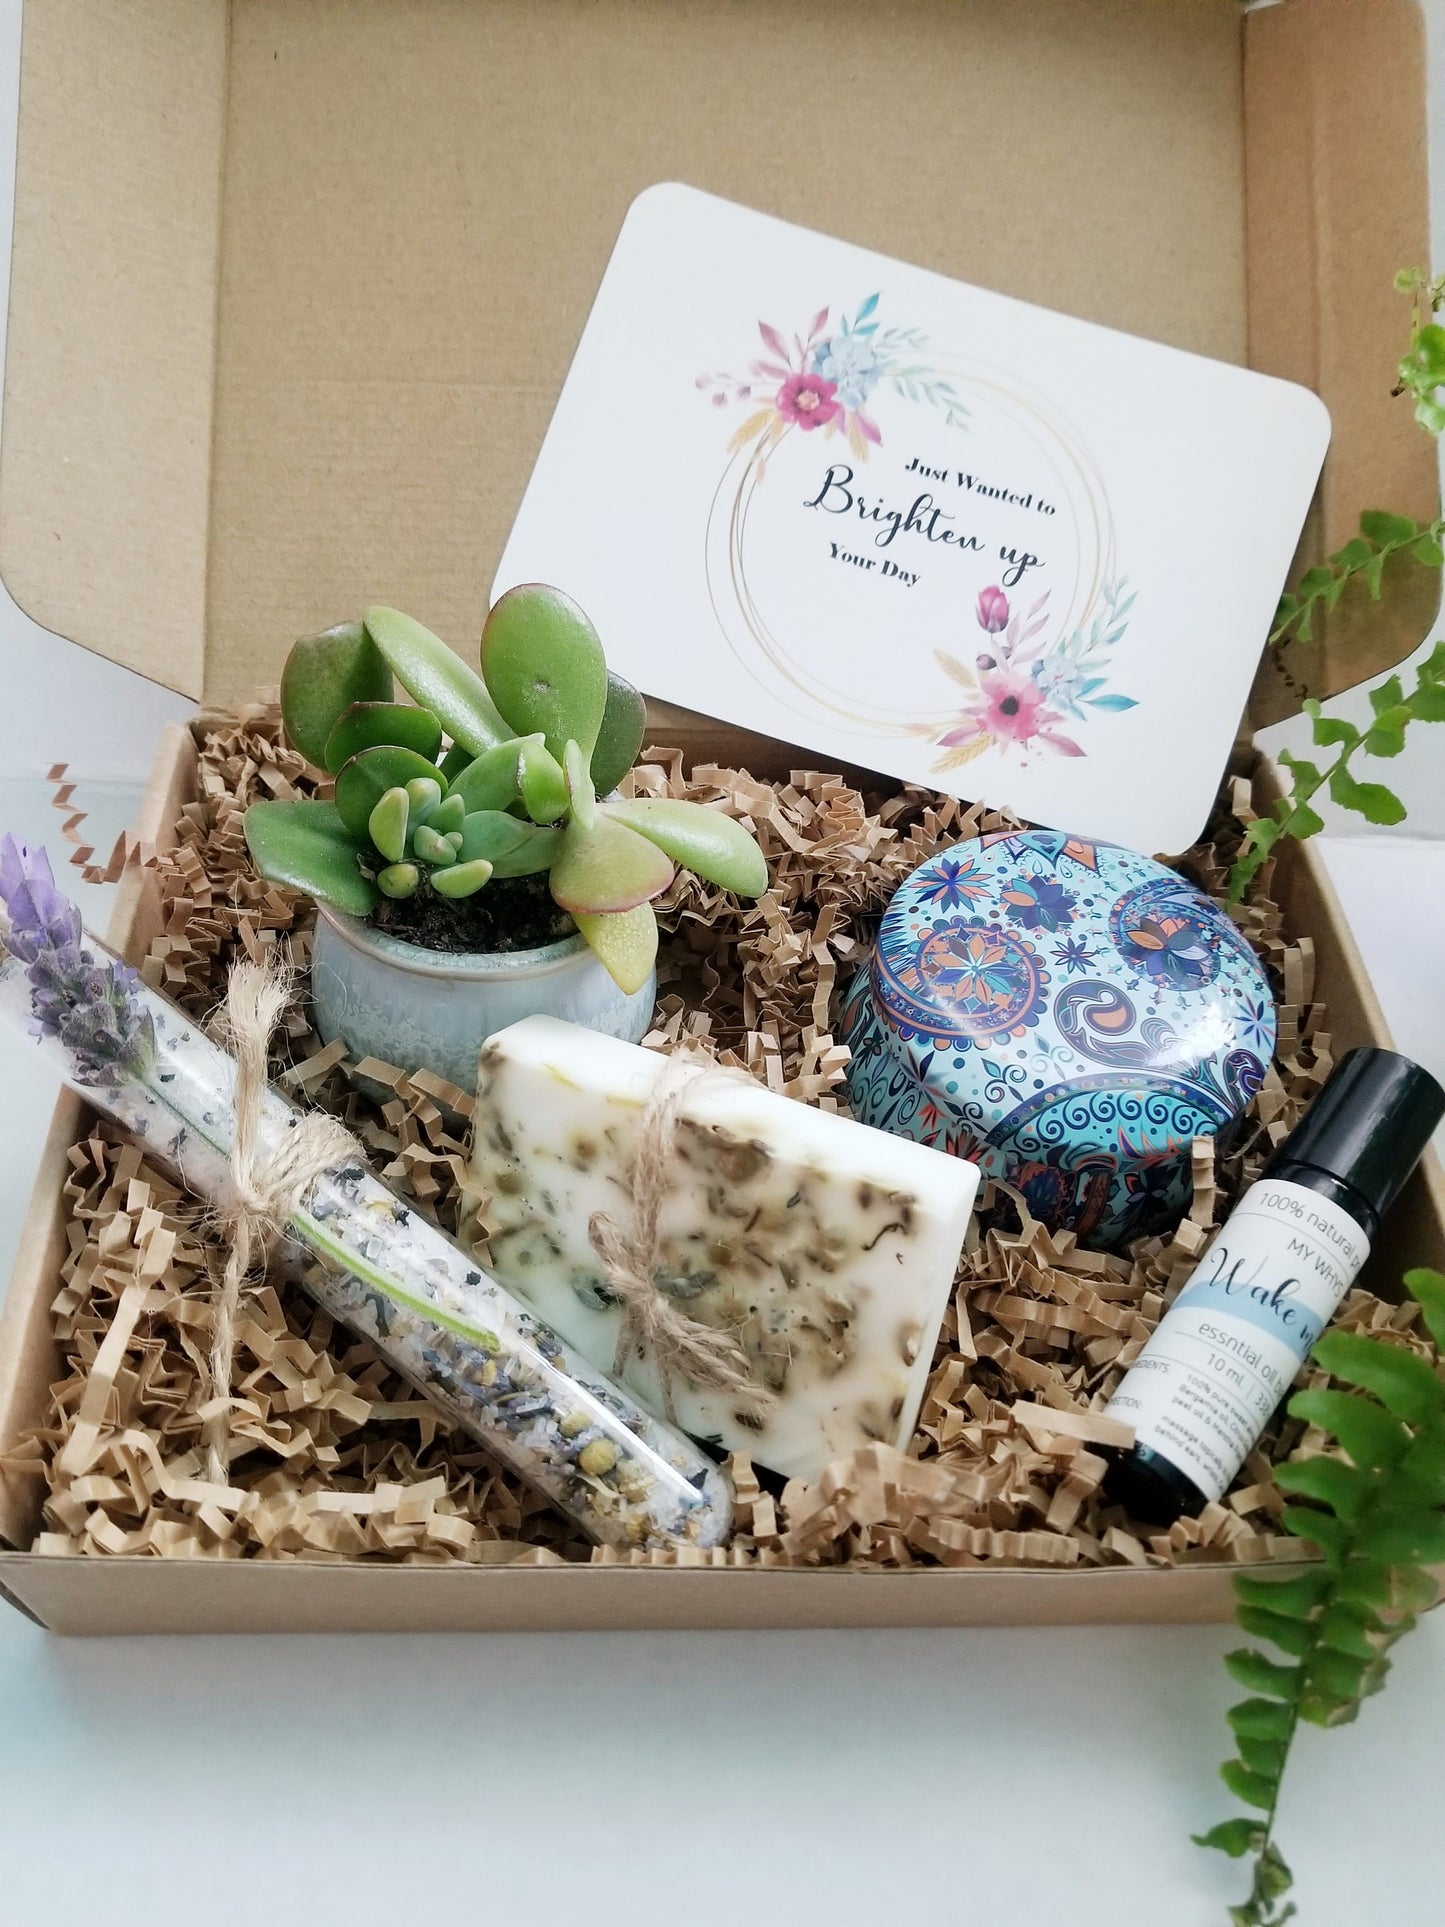 Cheer up gift set, Thinking of you care package